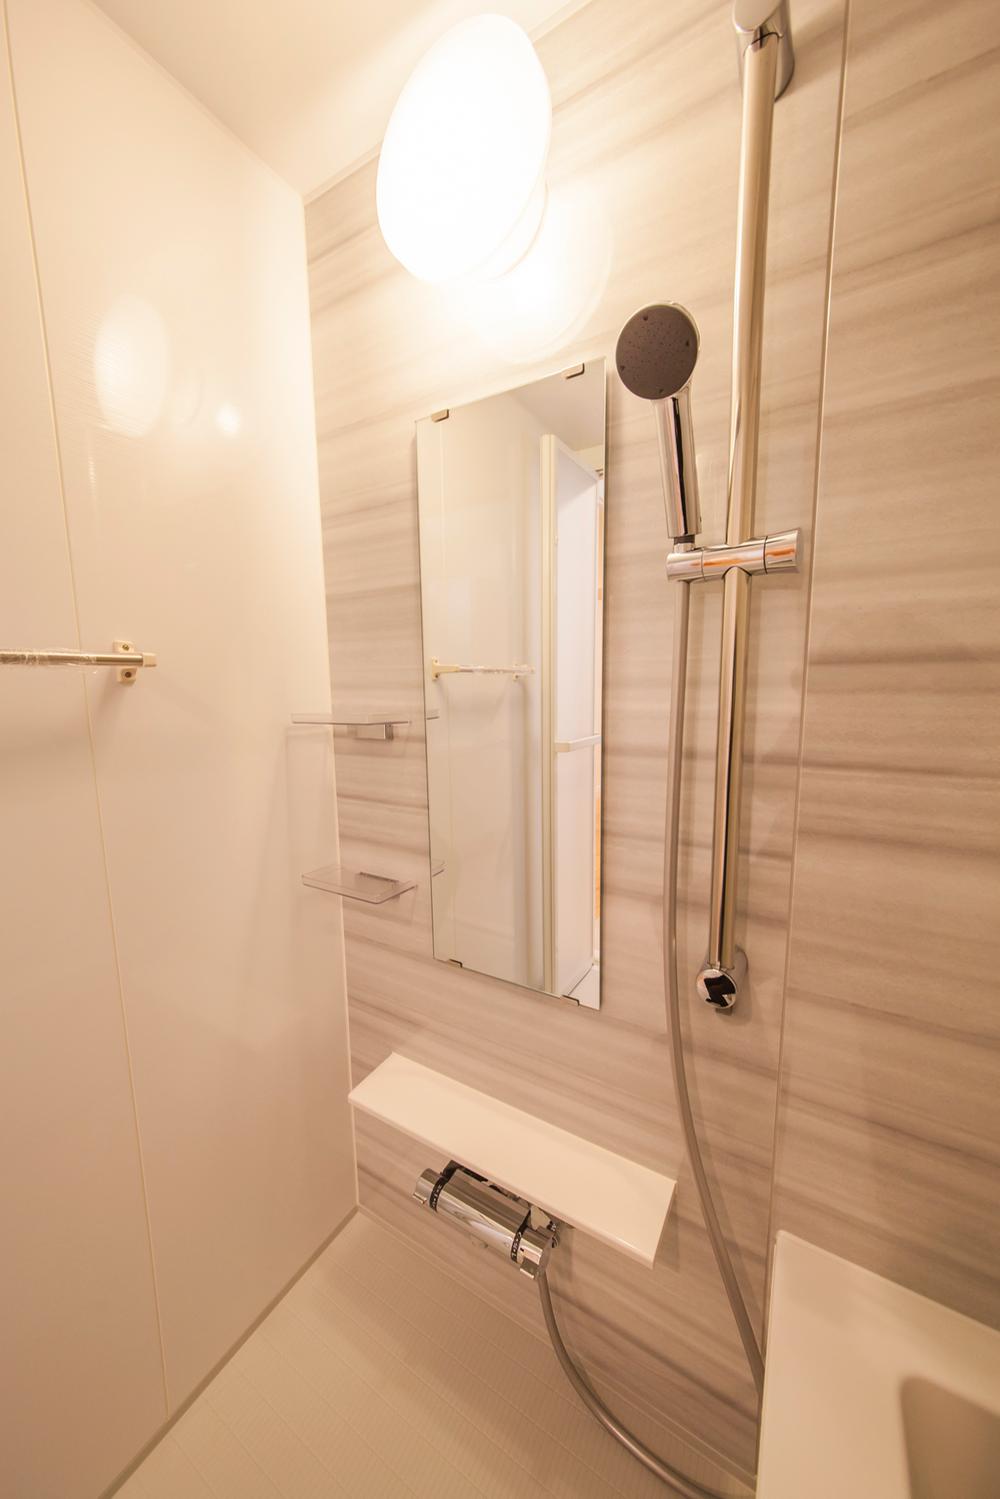 Bathroom. Thermo shower faucet